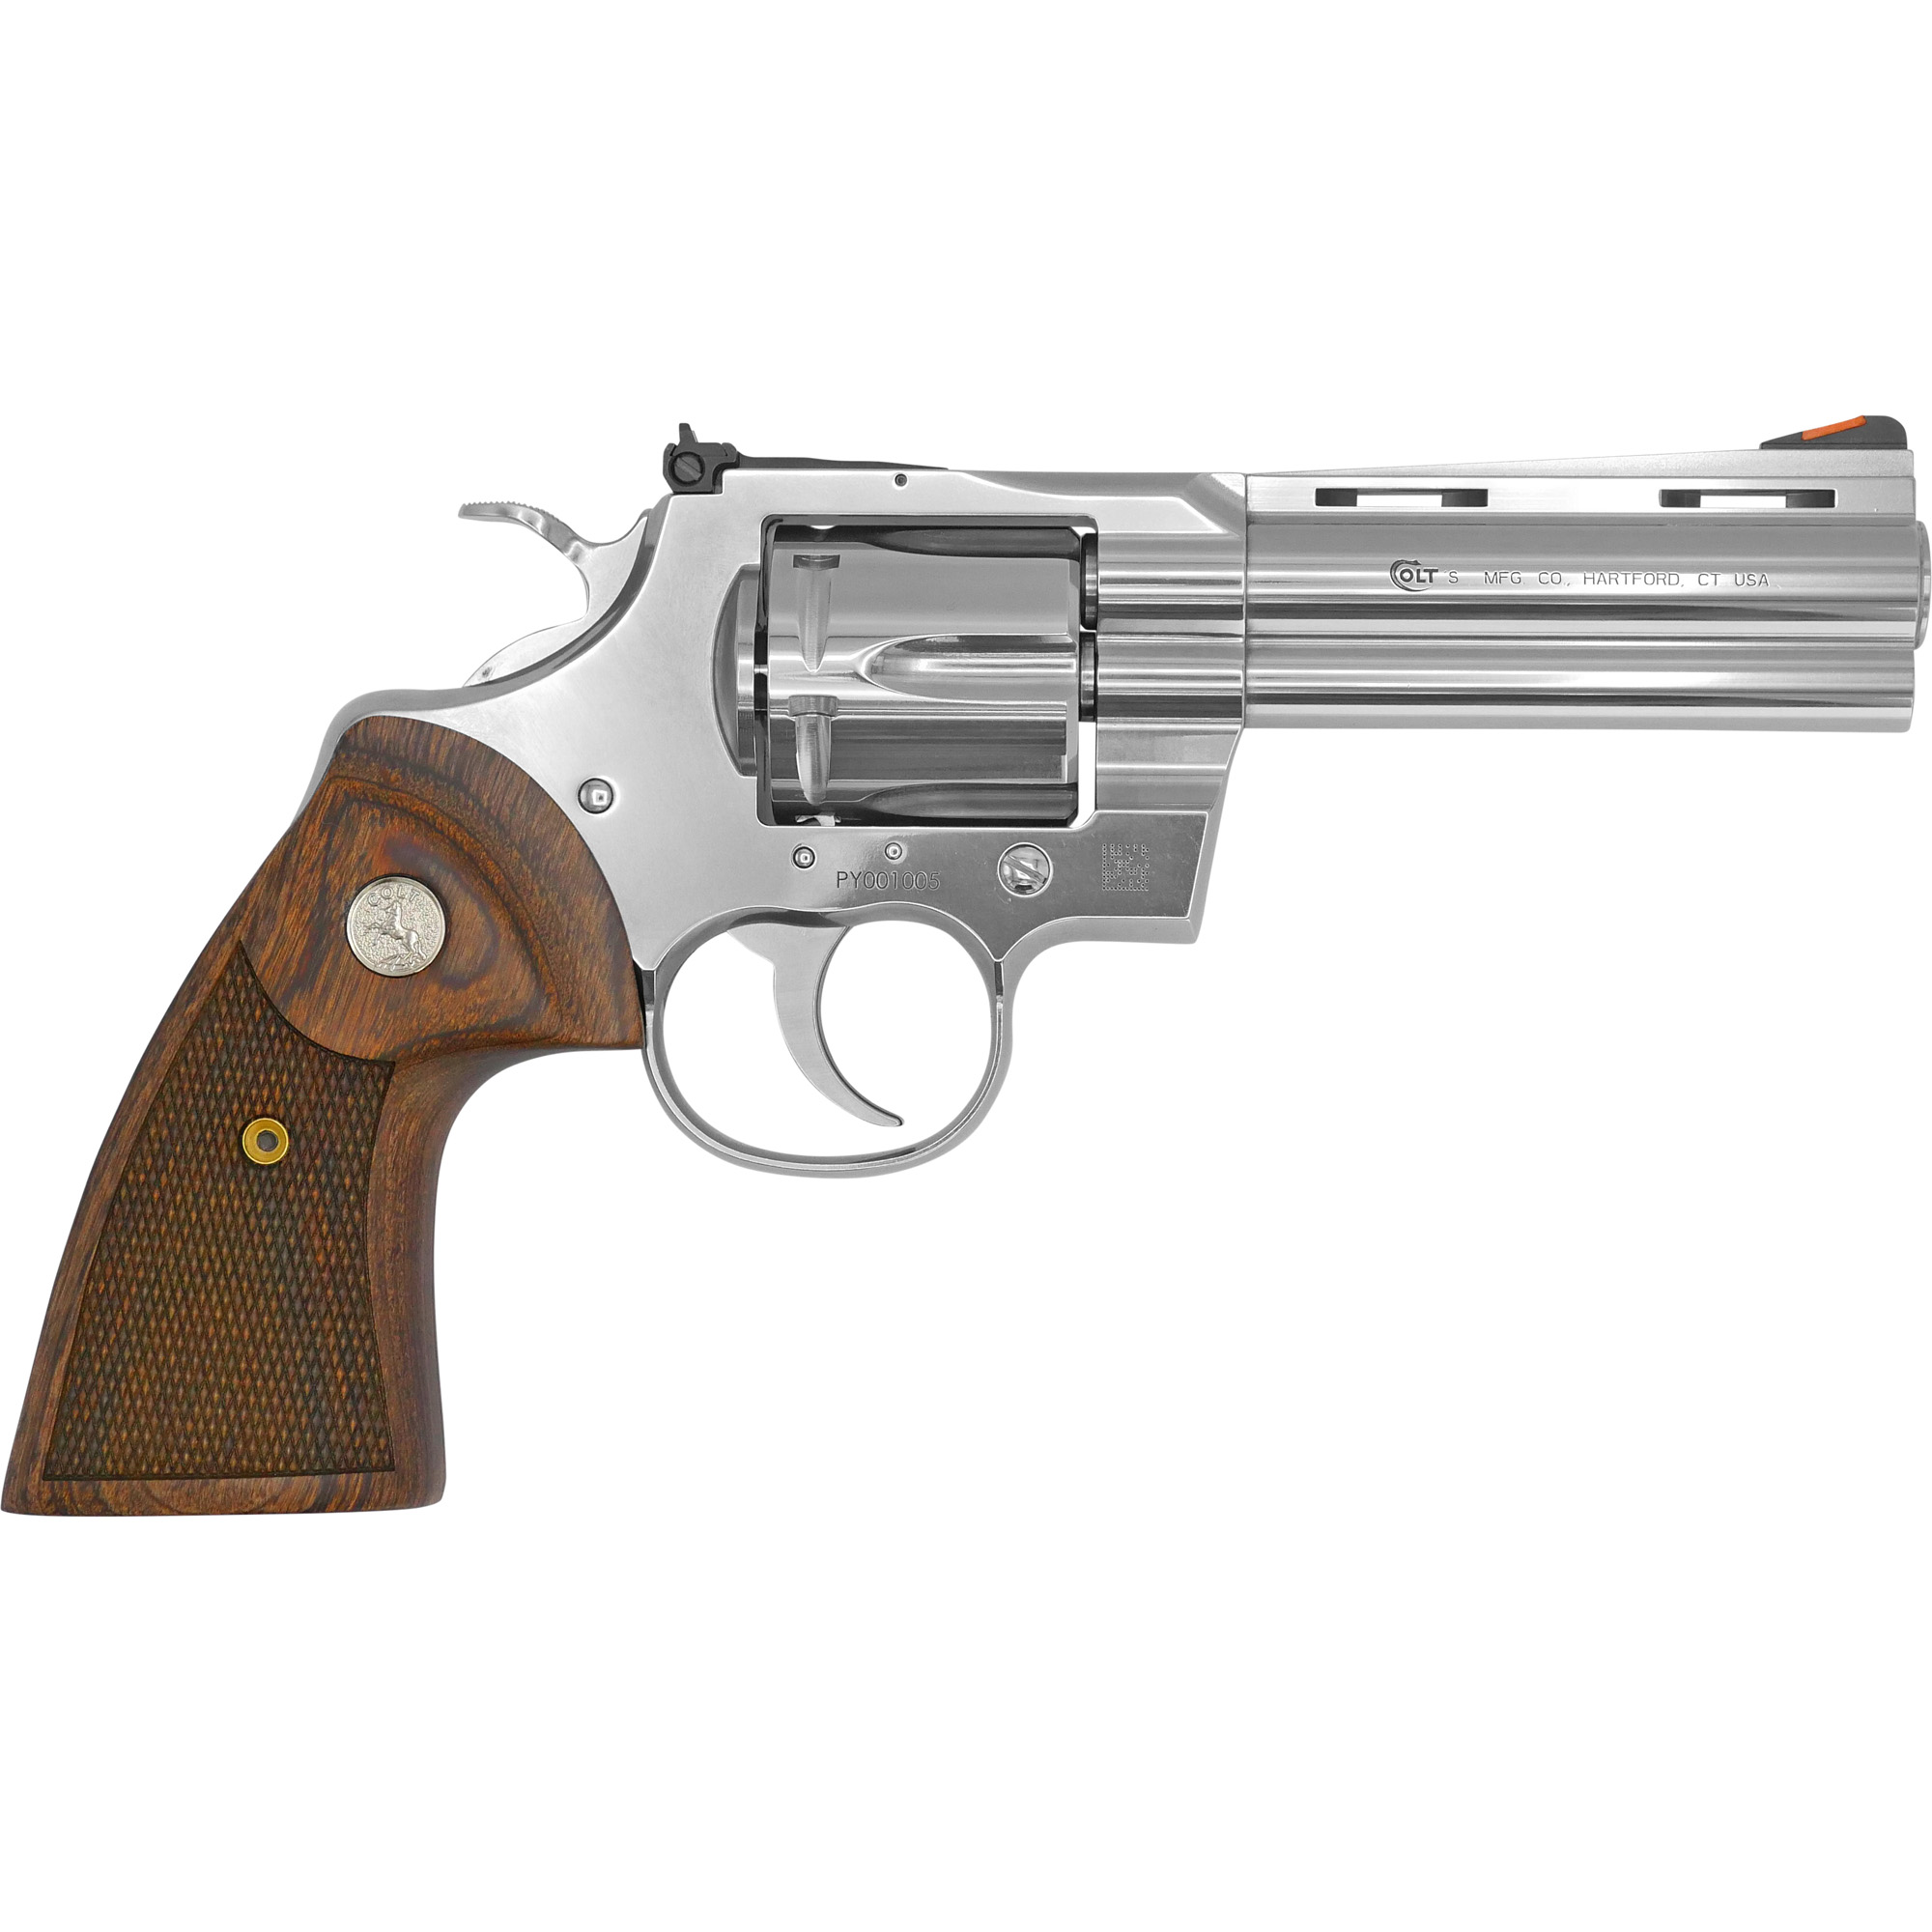 COLT PYTHON 357MAG 4.25 6RD STAINLESS